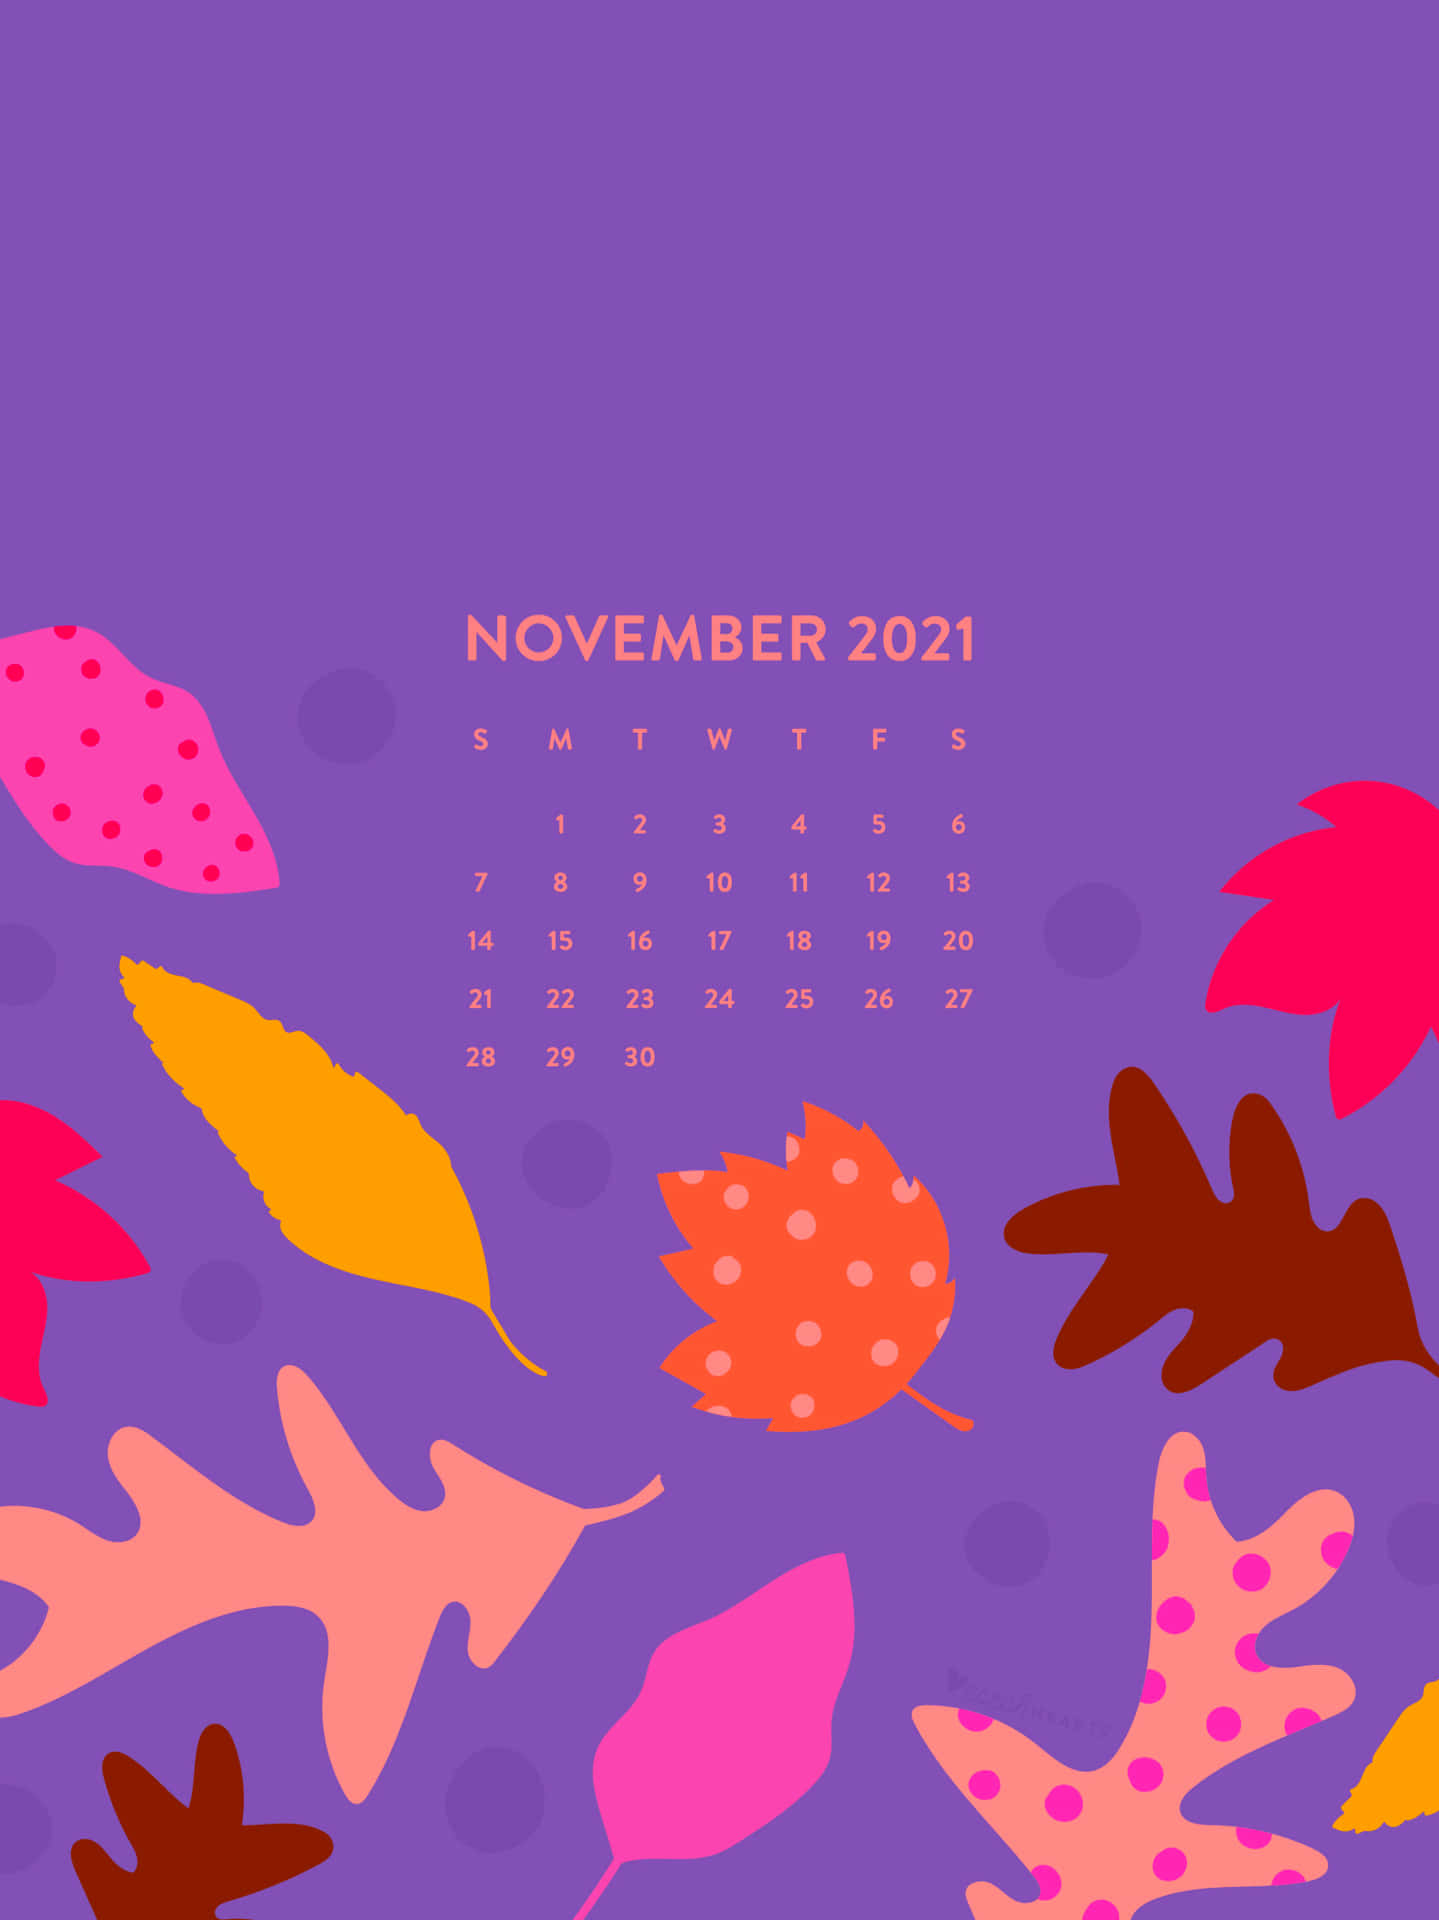 November 2021 Calendar With Colorful Leaves Wallpaper